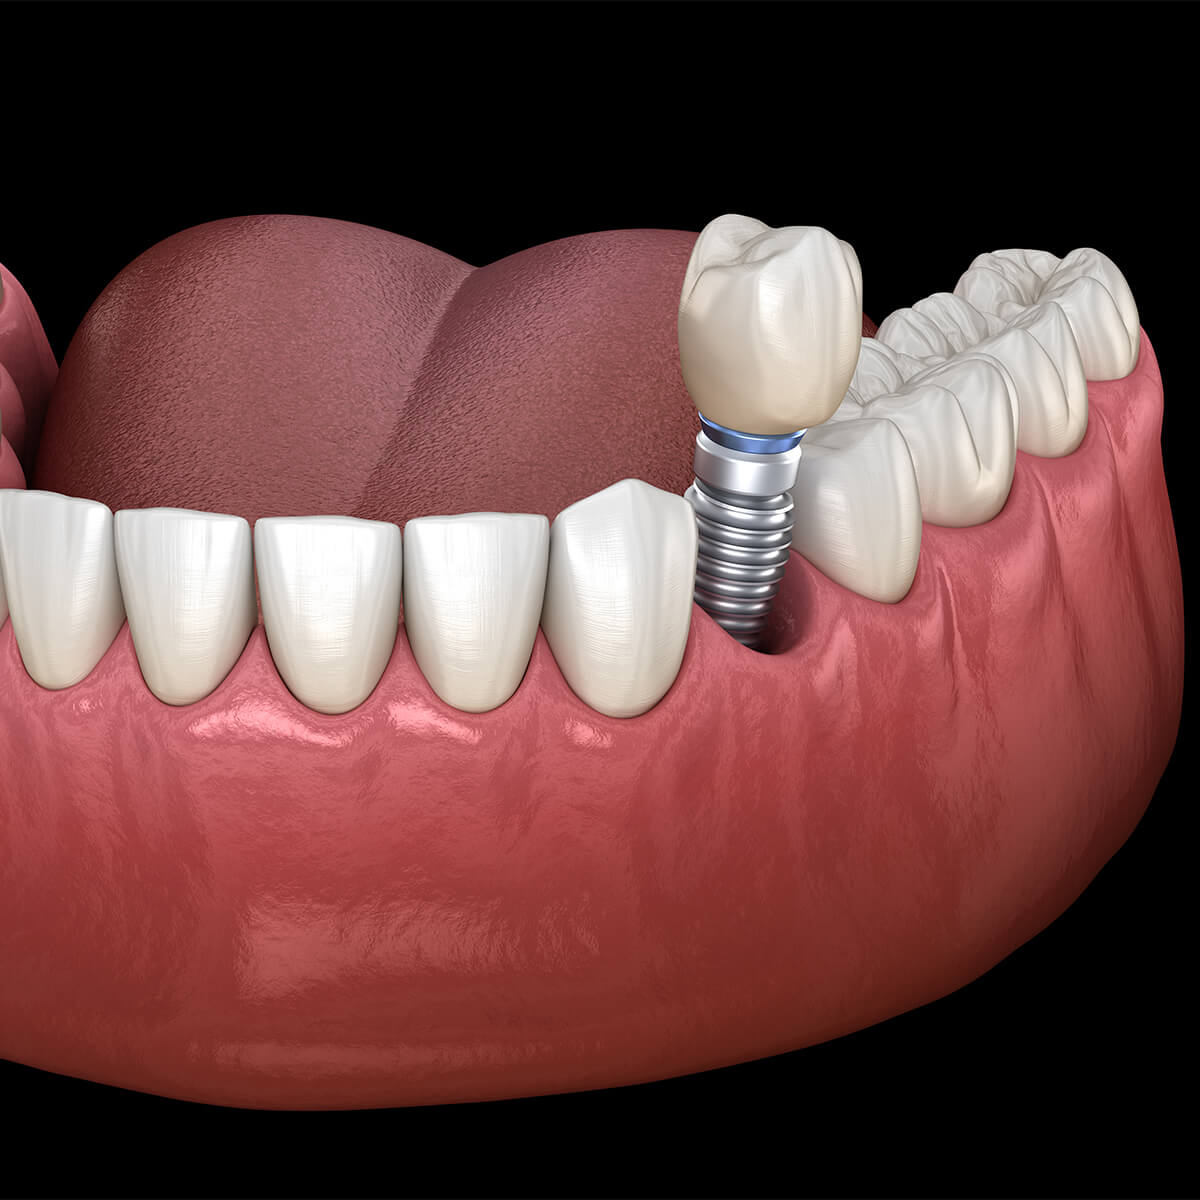 Dental Implant Surgery in Flower Mound TX Area